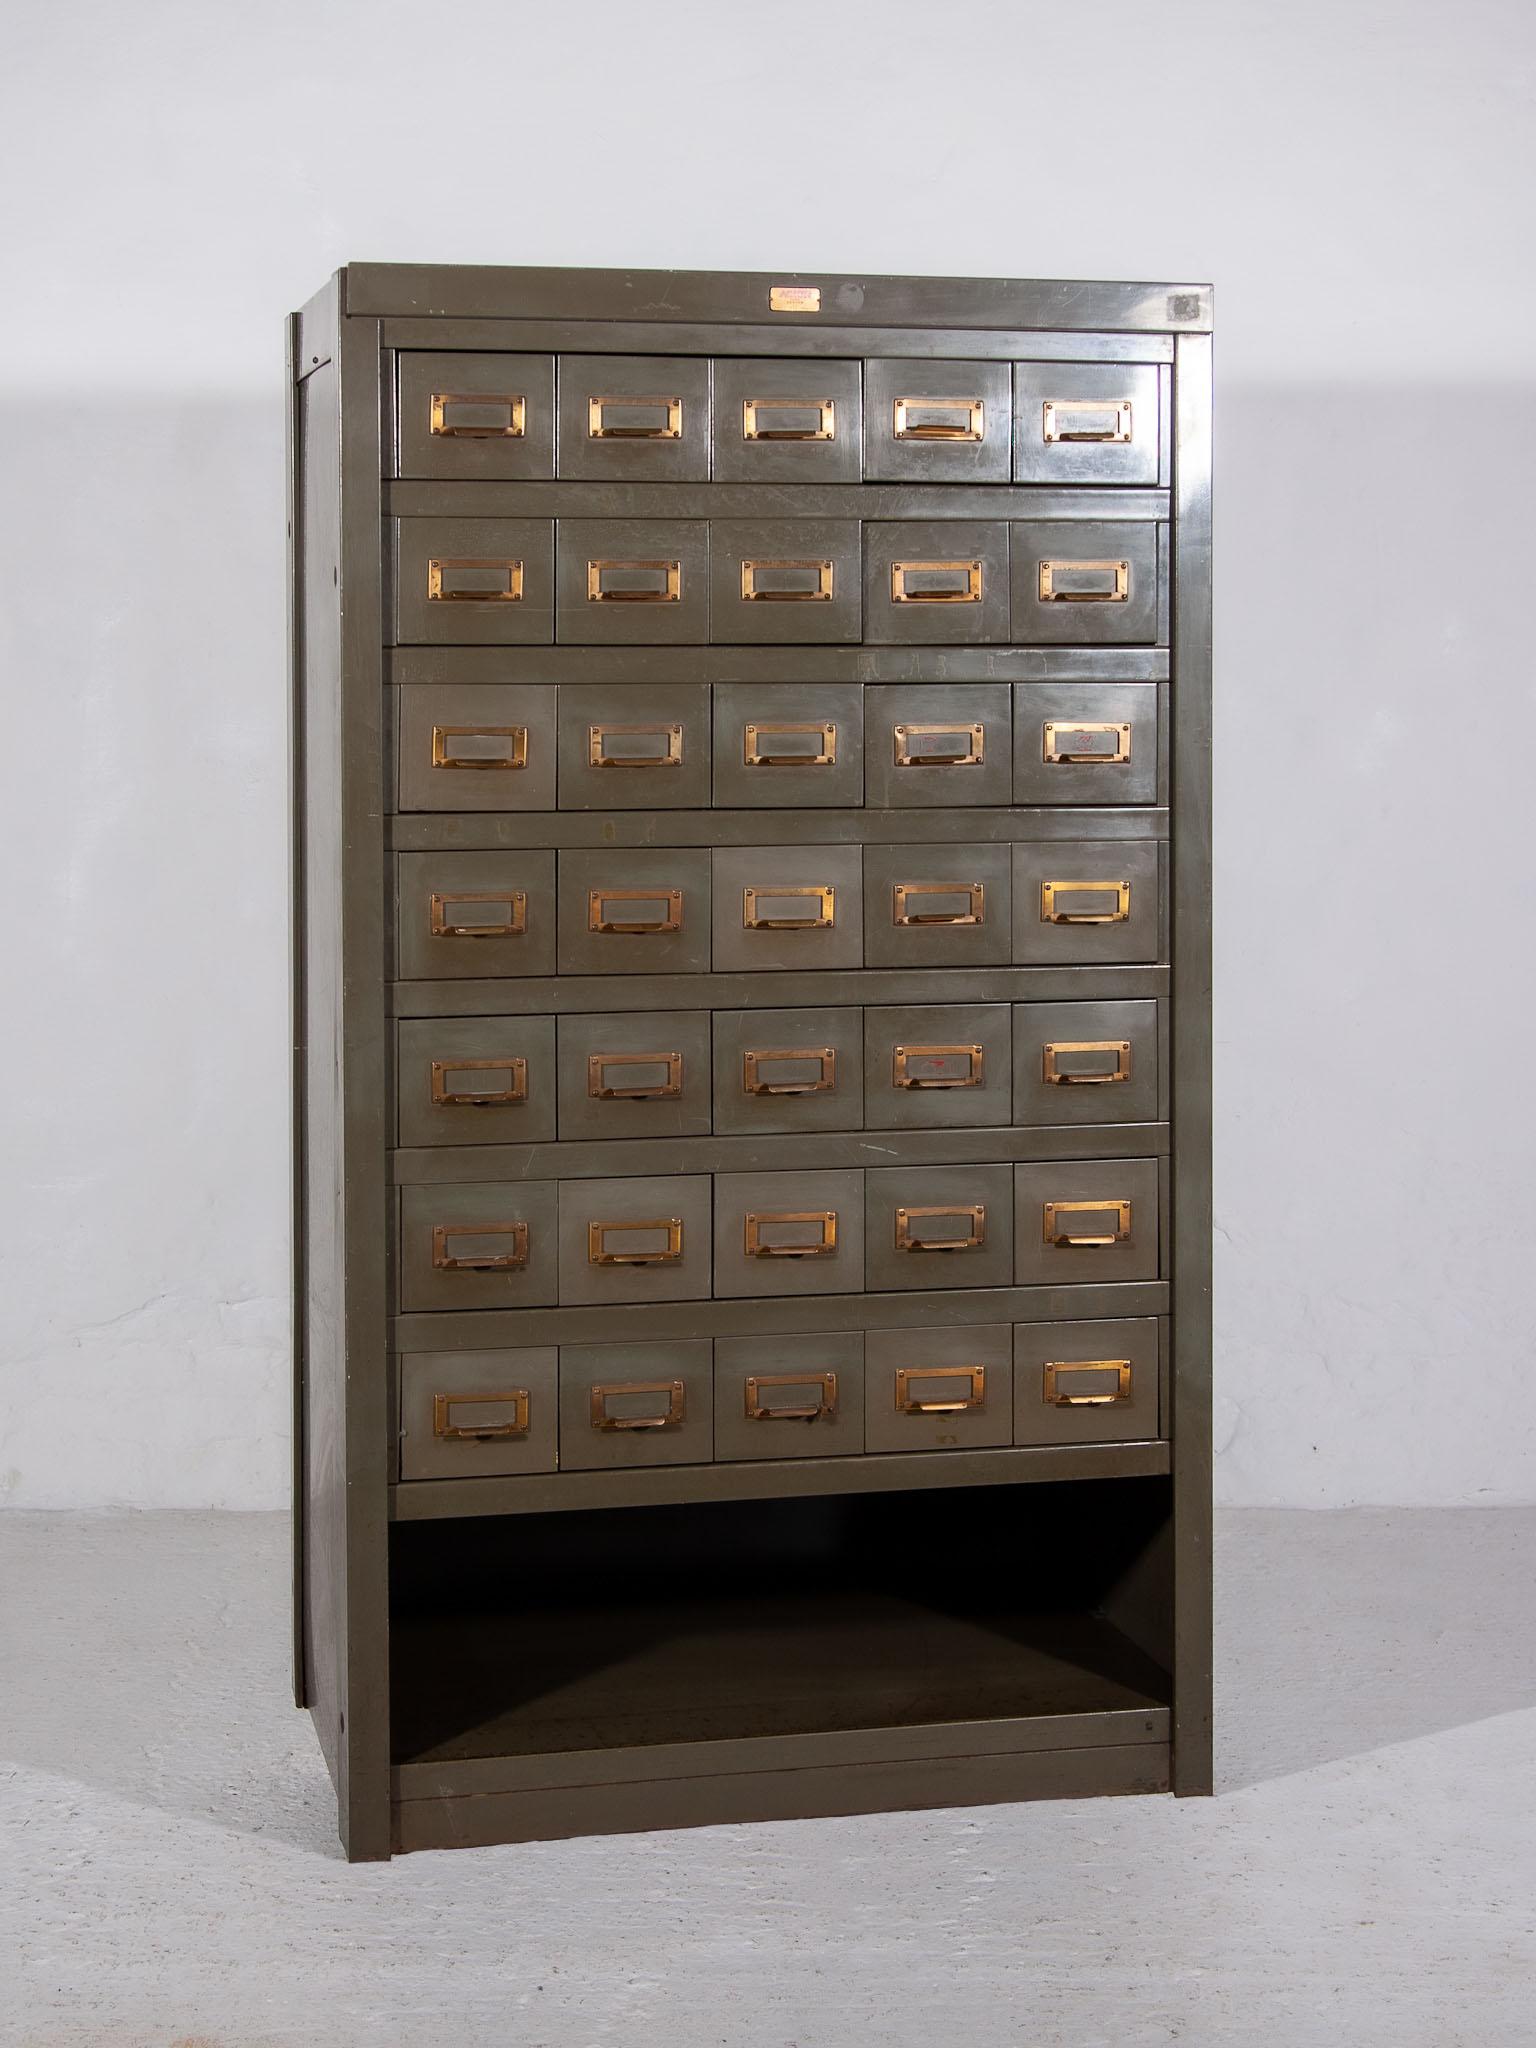 Acior Maison Desoer Liège - Industrial chest of drawers very solidly built all steel 35 drawer file cabinet with drawers and the original label. The drawers glide open by pushing one of the two buttons that operate as one. All open smoothly and